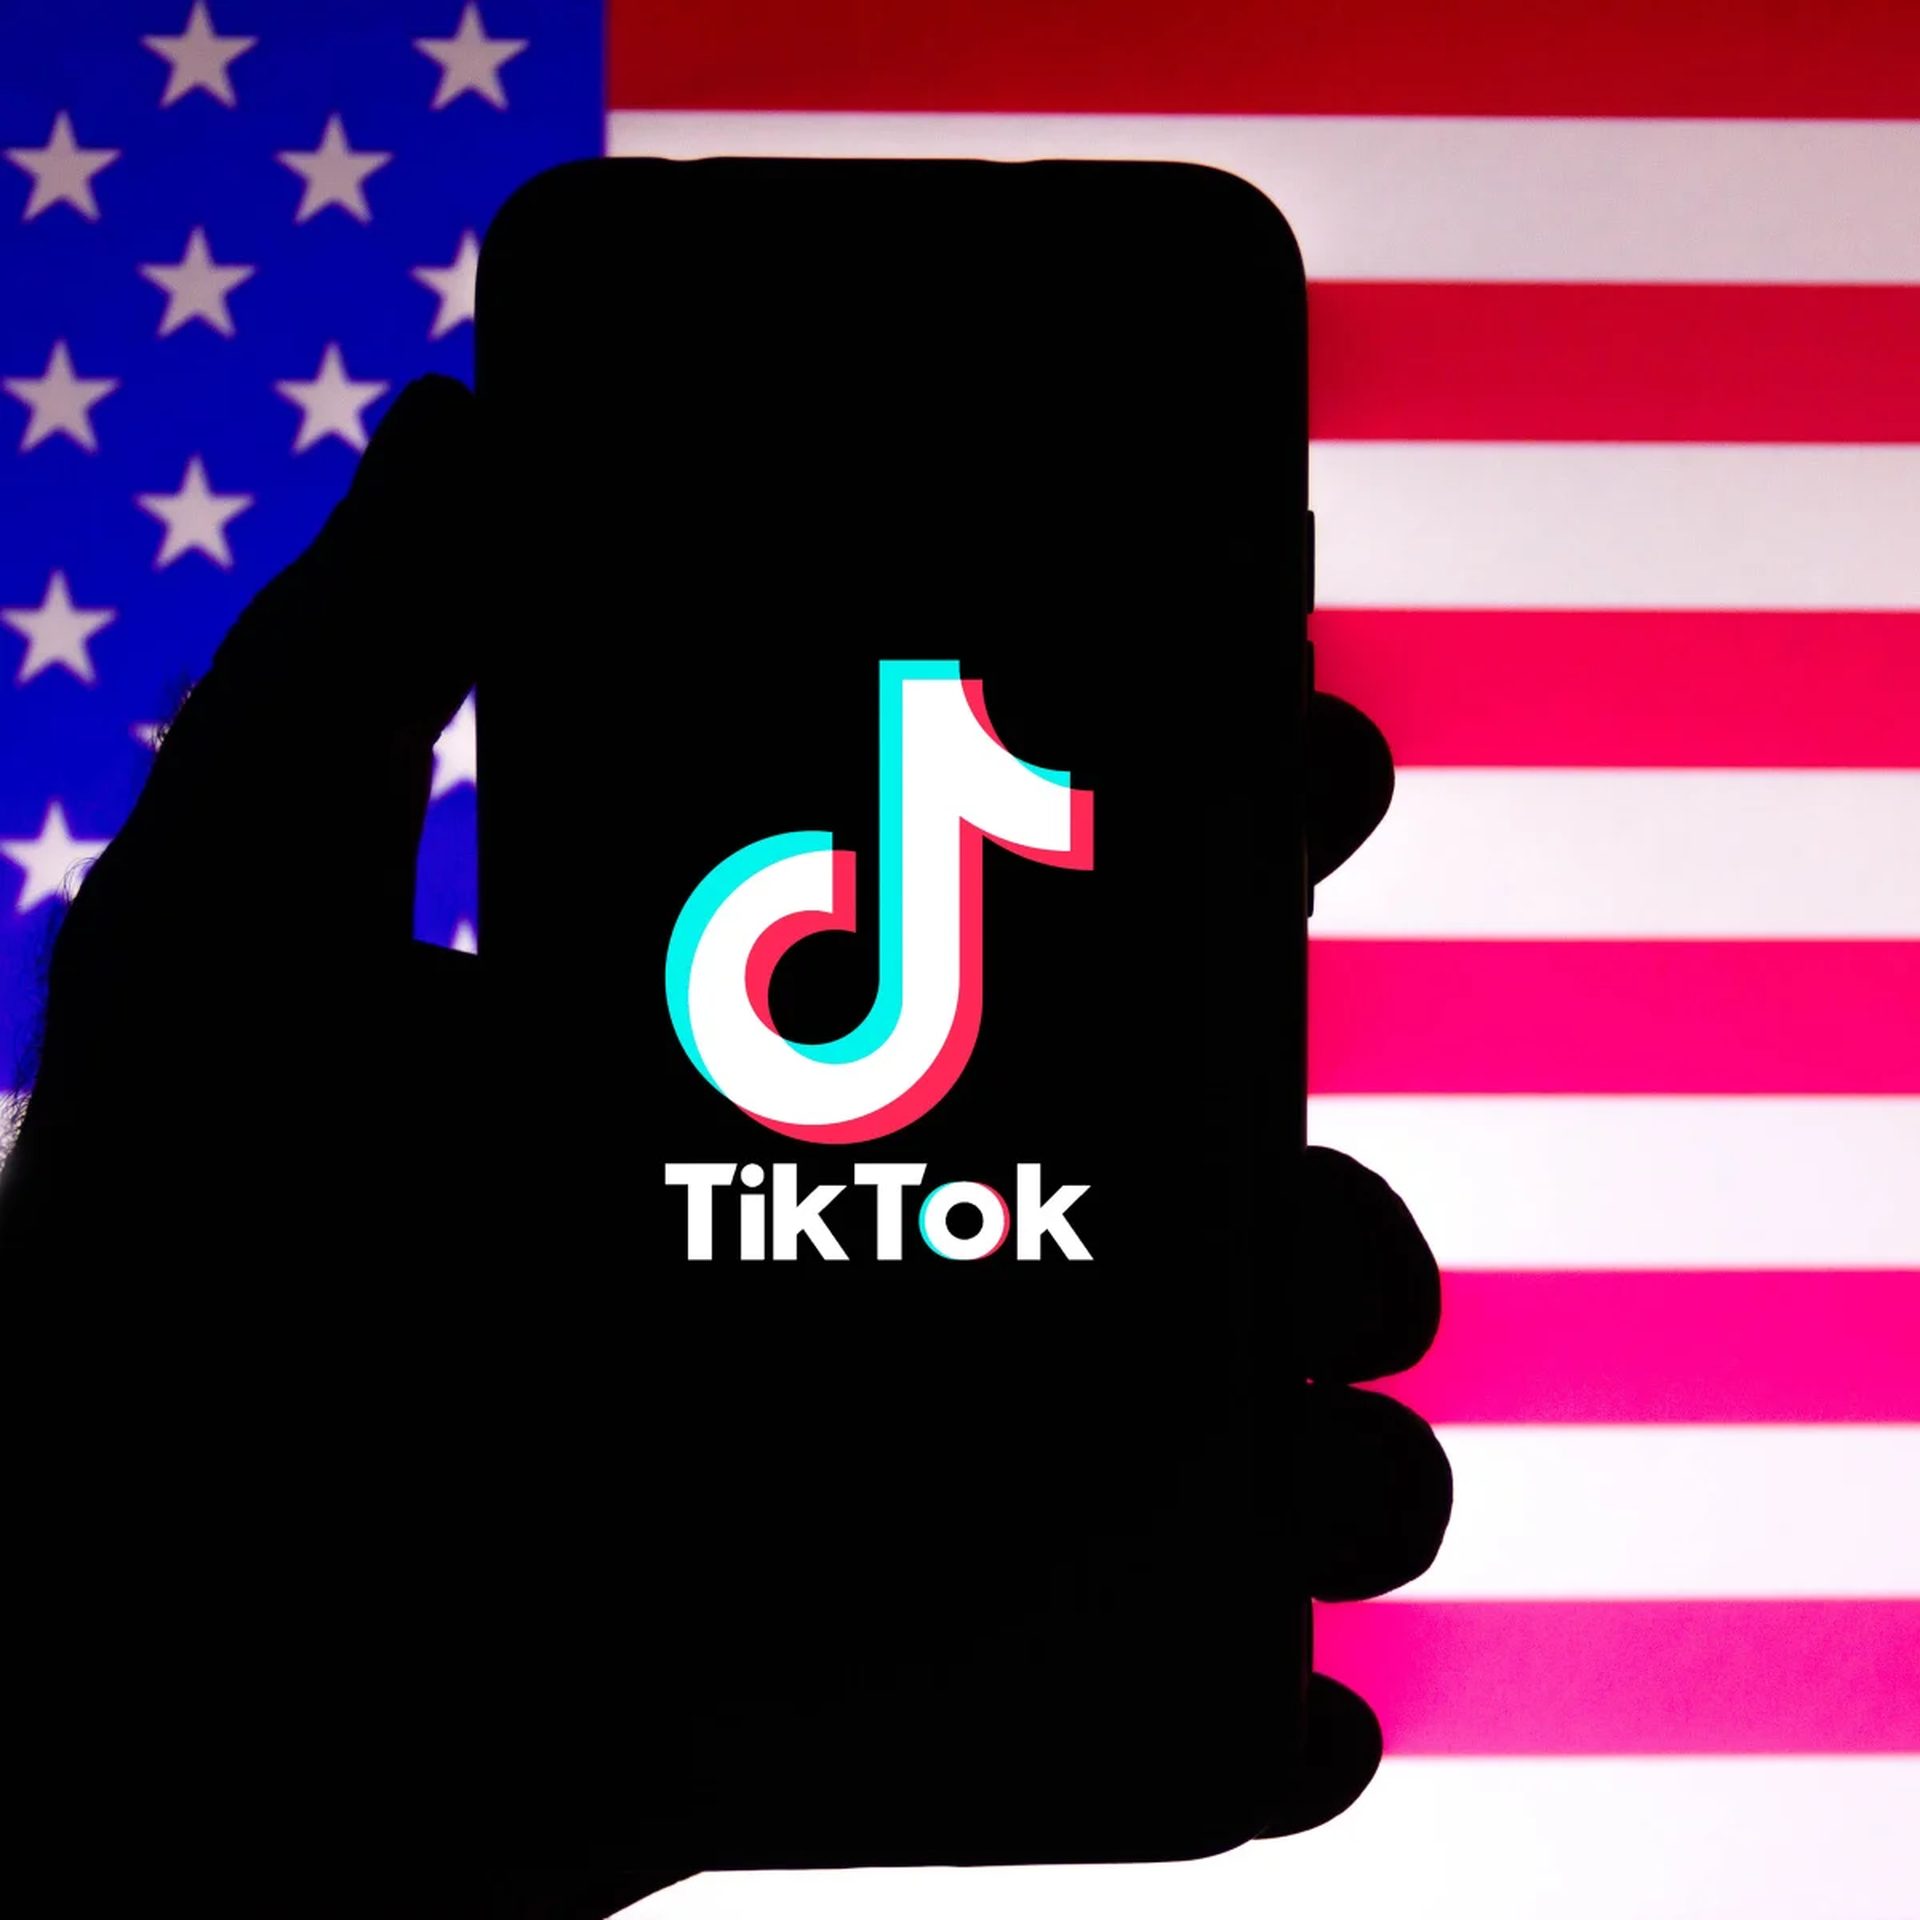 Tiktok data privacy settlement: Website, email, payout